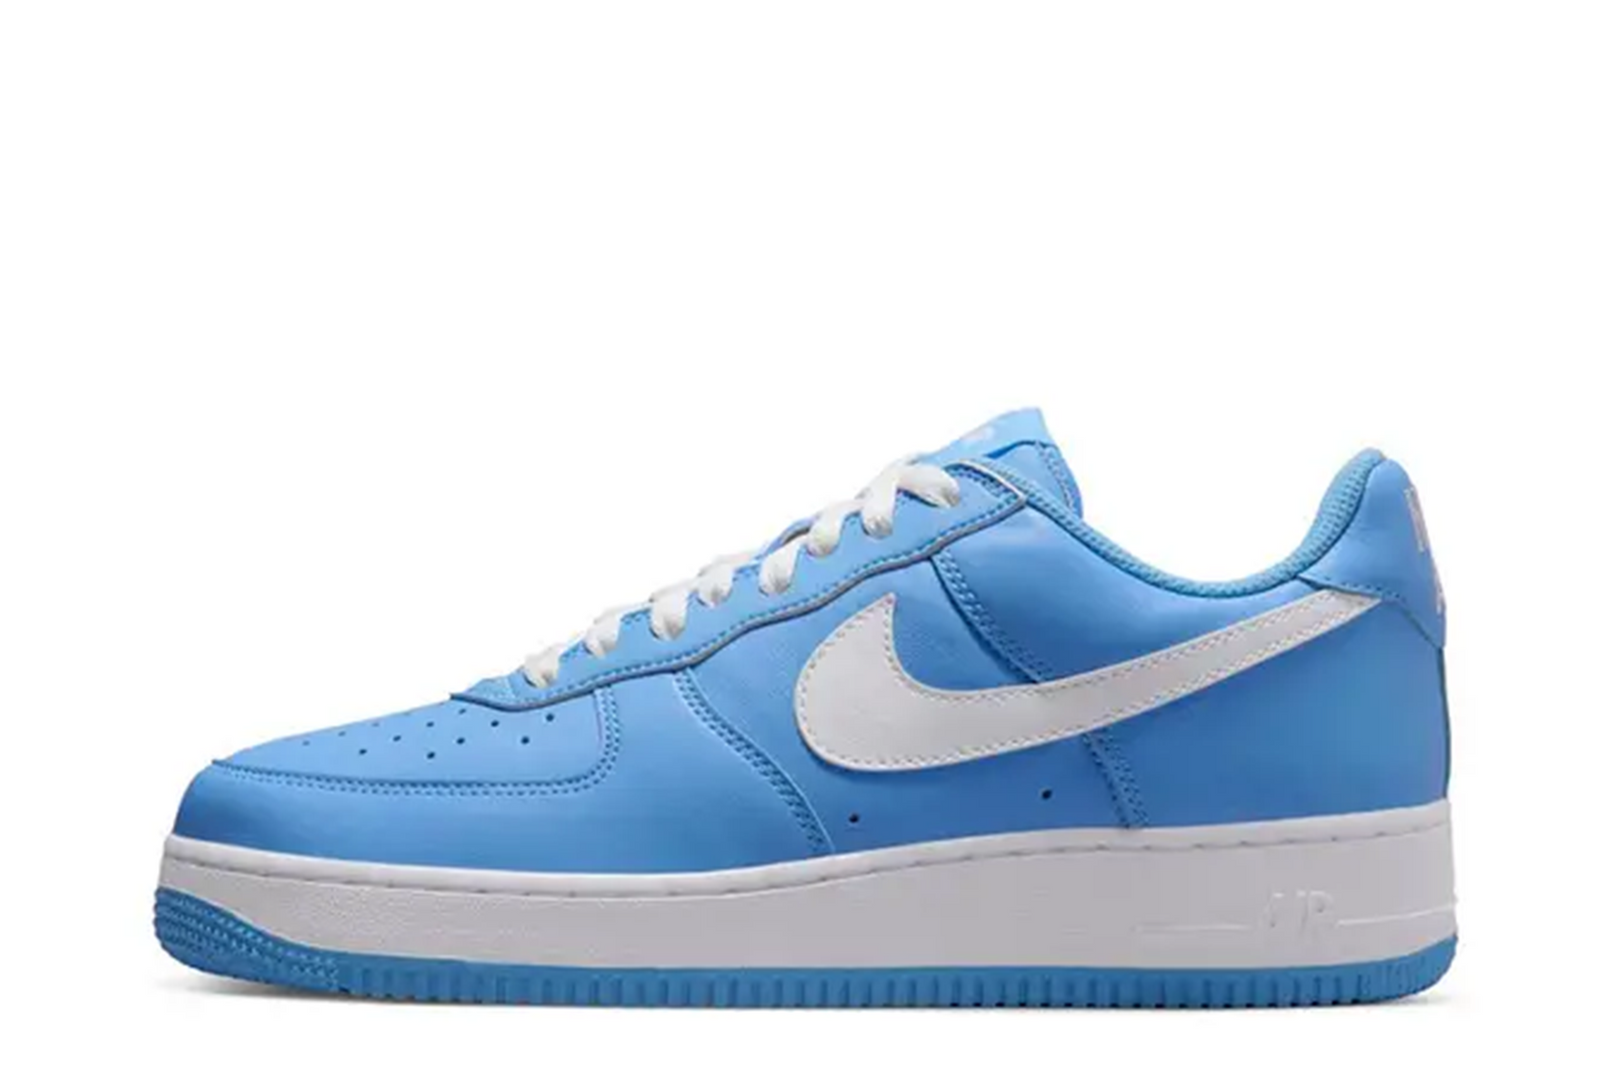 Air Force 1 Low '07 Retro 40th Anniversary Edition "University Blue"